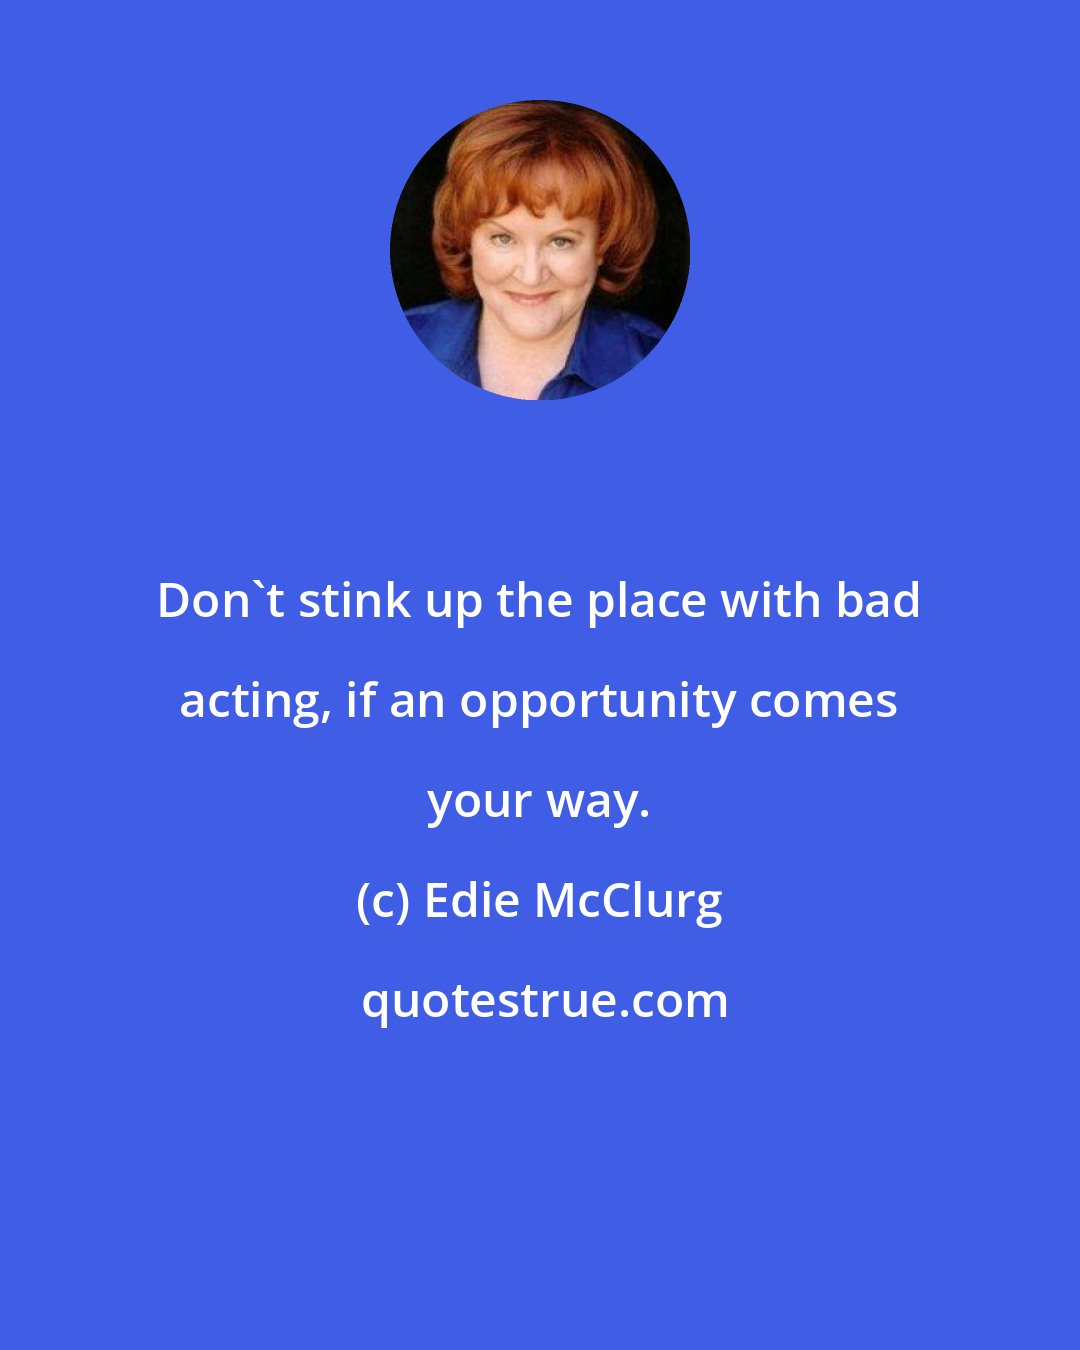 Edie McClurg: Don't stink up the place with bad acting, if an opportunity comes your way.